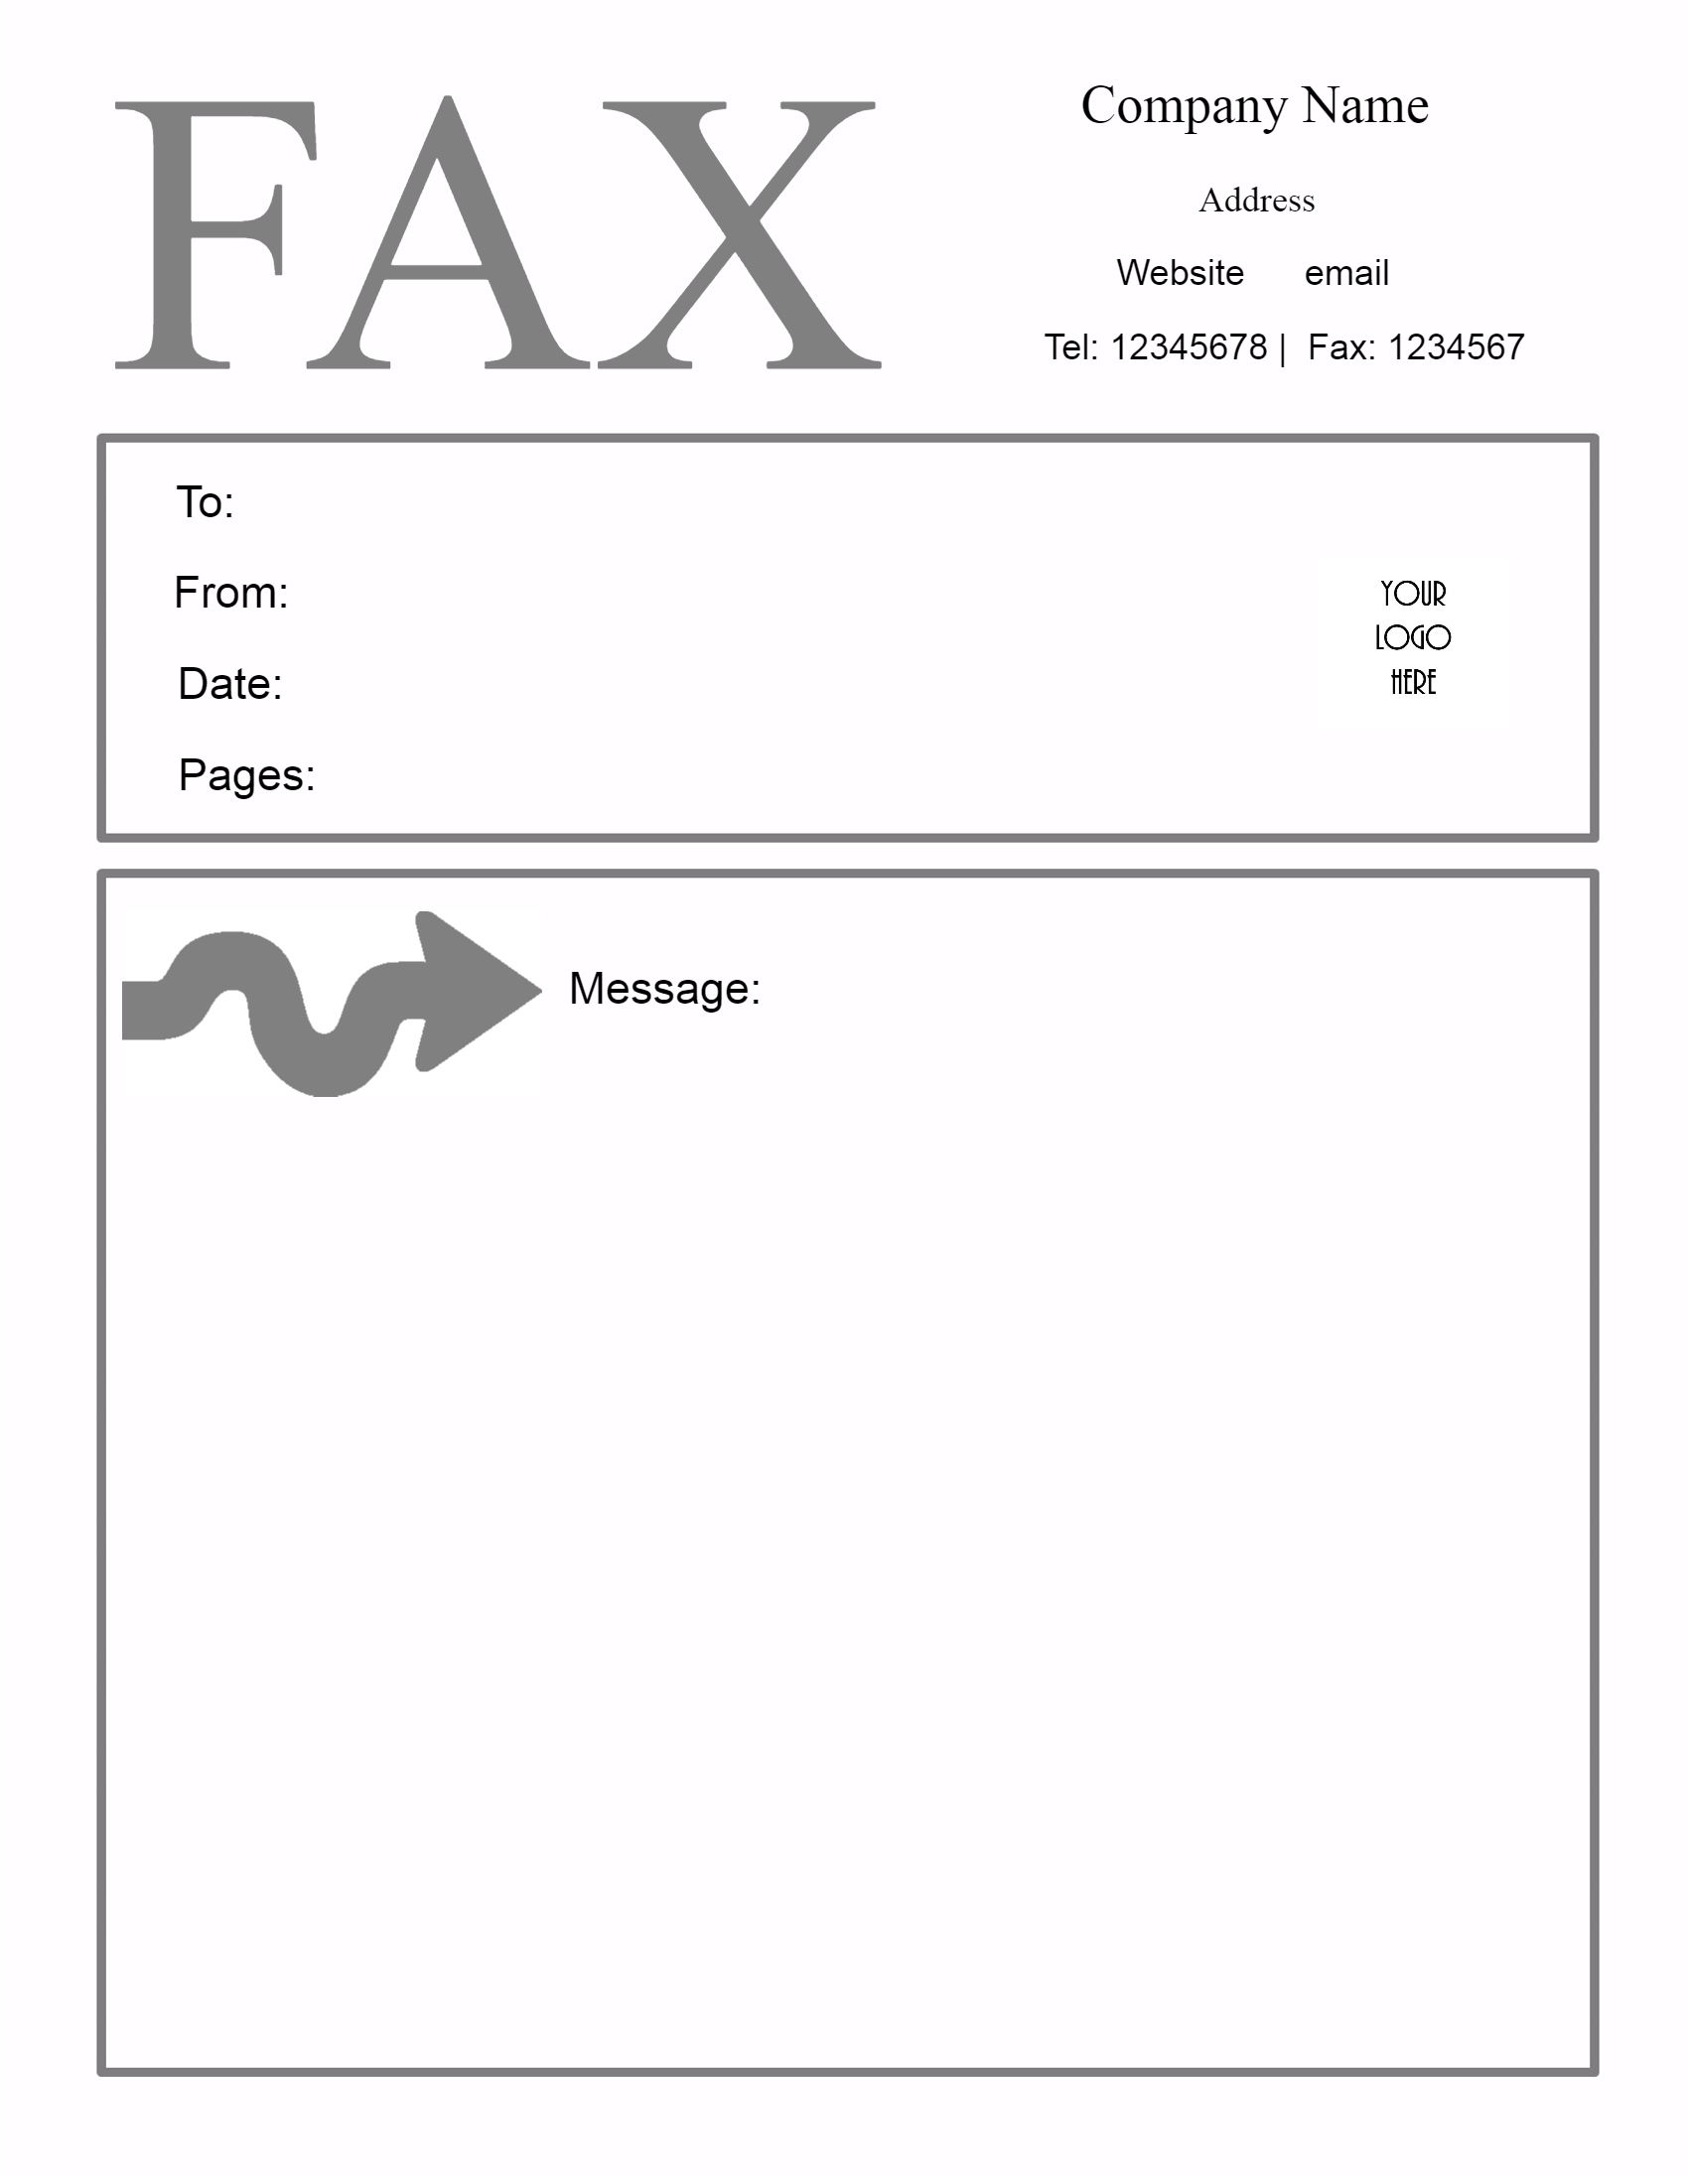 Free Fax Cover Sheet Template | Customize Online then Print